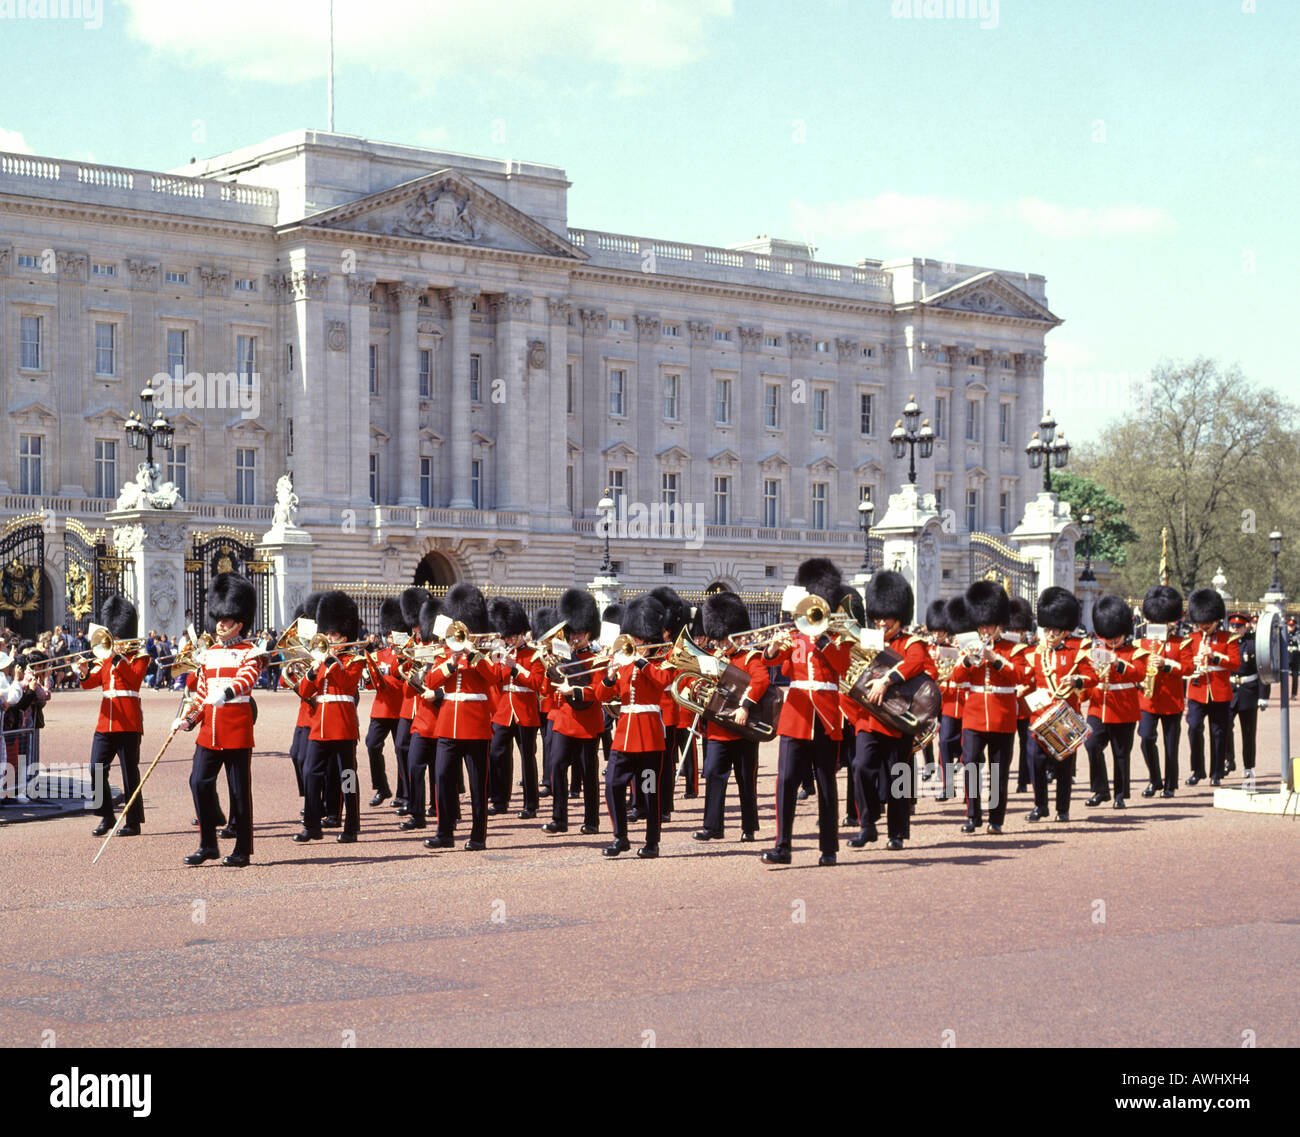 Buckingham Palace British soldier in guard regiment musicians marching & playing musical instruments changing guard ceremony Iconic London England UK Stock Photo